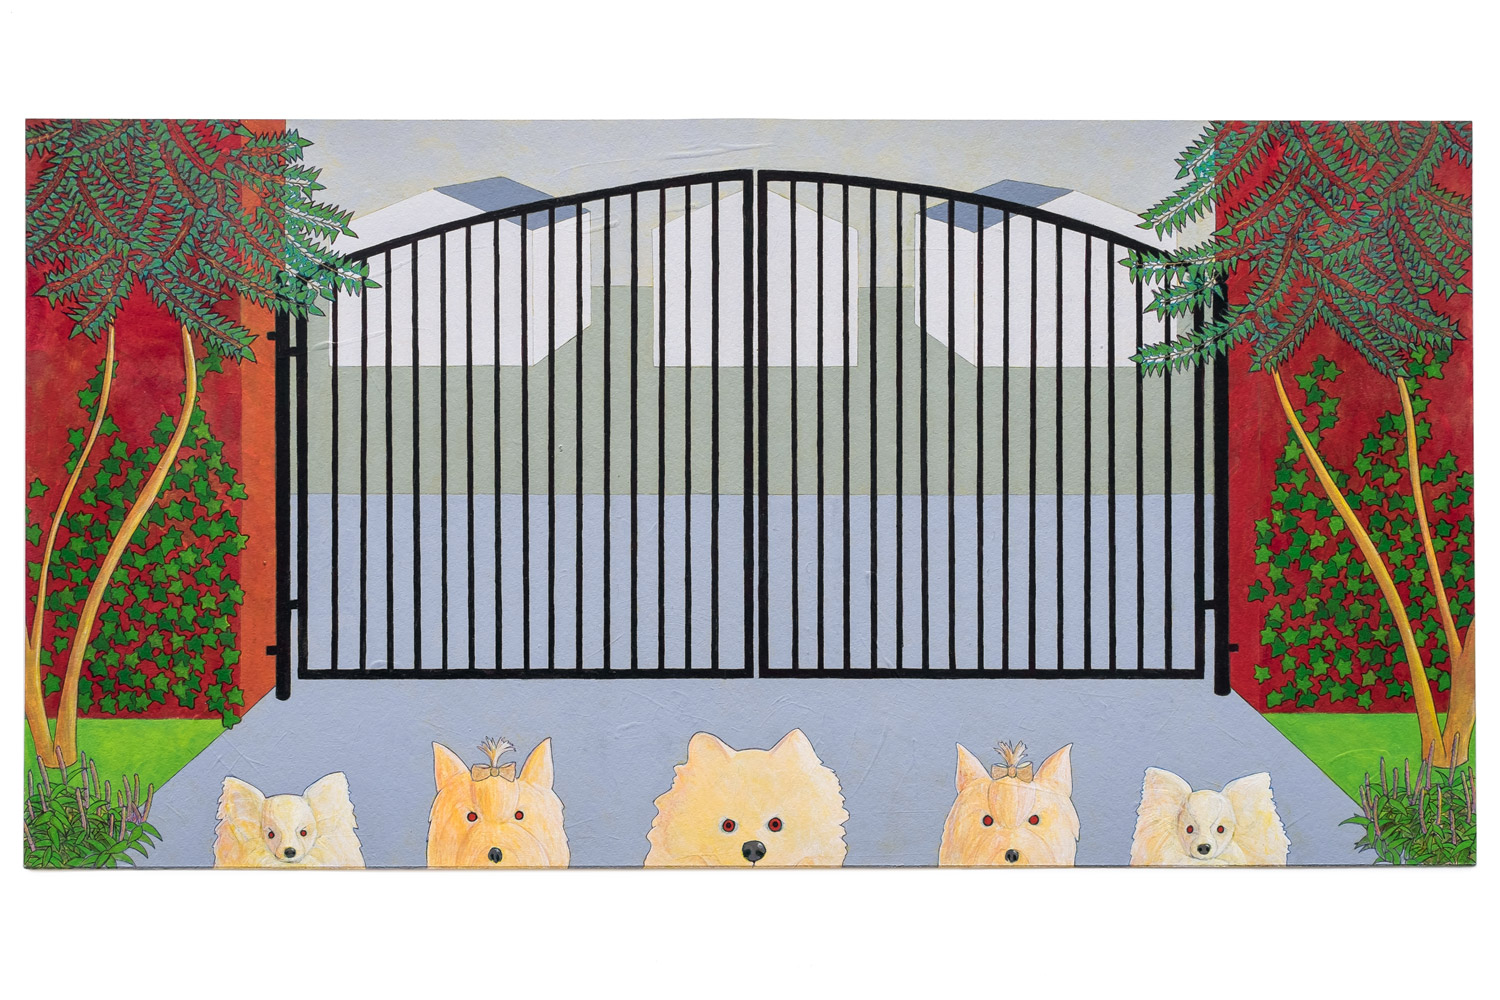   Dog Gate , 2014 Acrylic on paper, 11” x 21”  {Sold} 